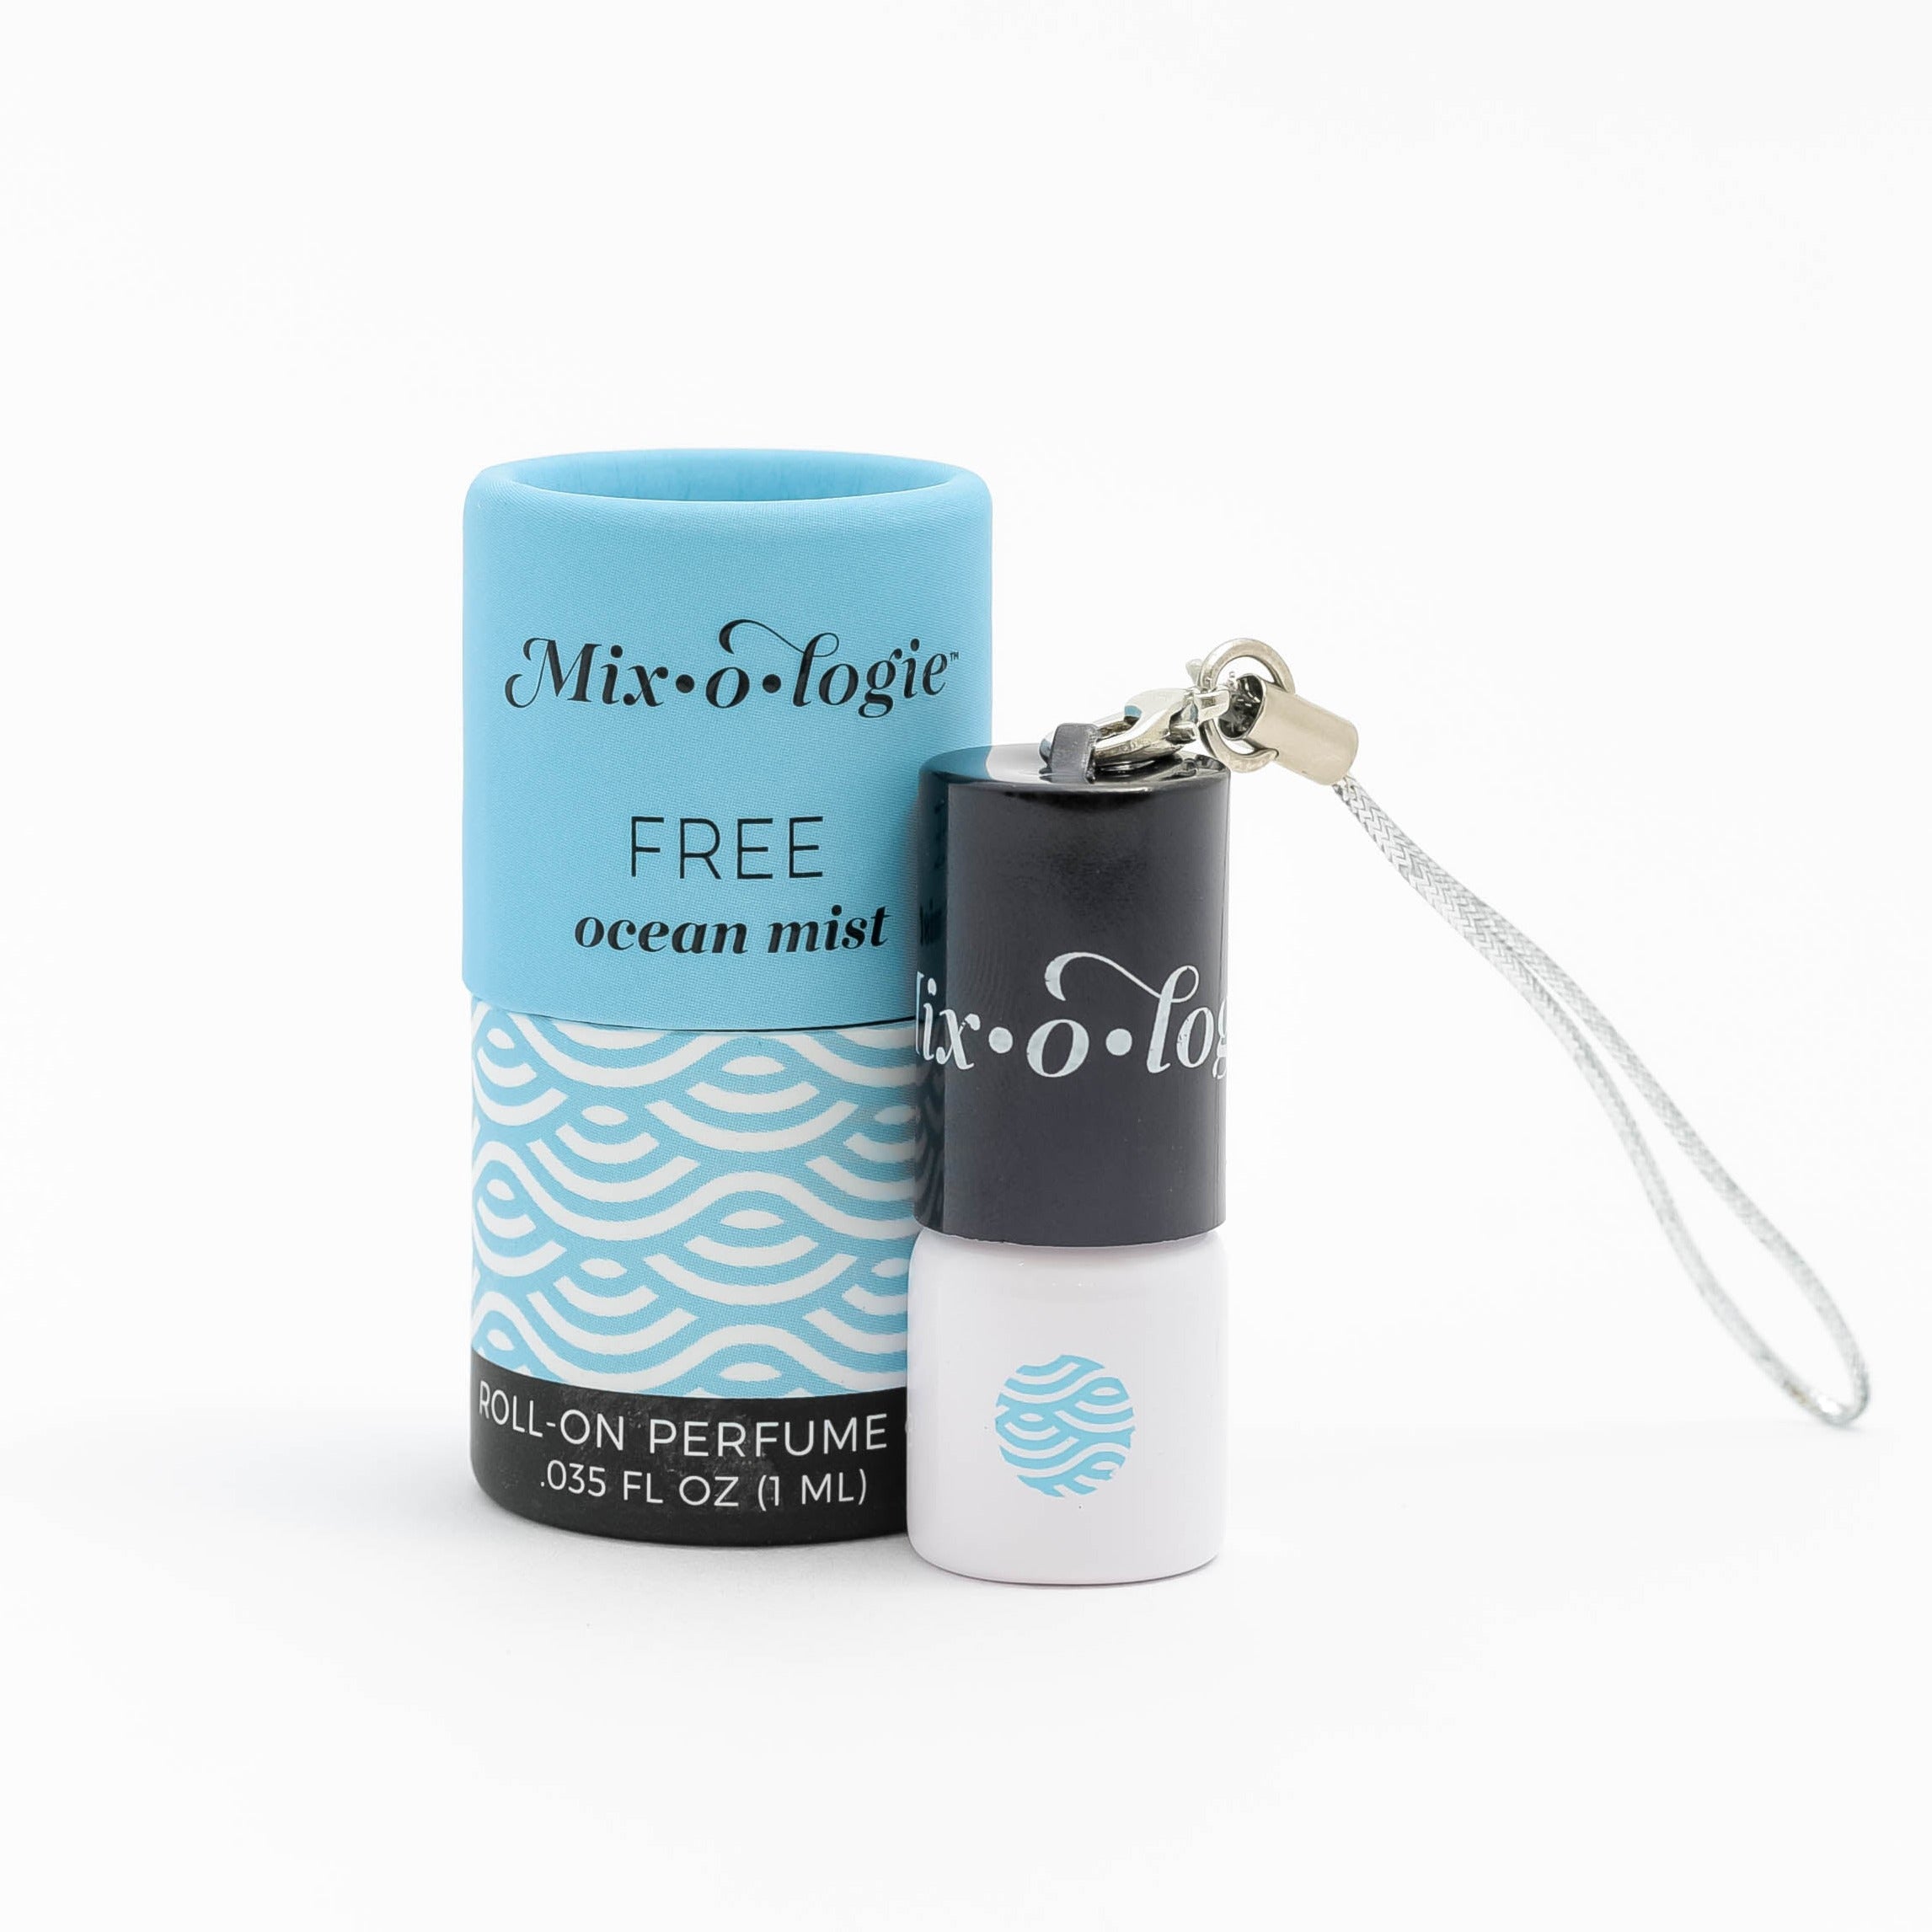 Free (Ocean Mist) mini white cylinder rollerballs with black top and keychain attachment with pale blue wave-like pattern and has .035 fl oz or 1 mL. Pale blue cylinder packing tube with pale blue wave-like pattern. Roll-on perfume oil. Mini rollerball and cylinder tube are on a white background.